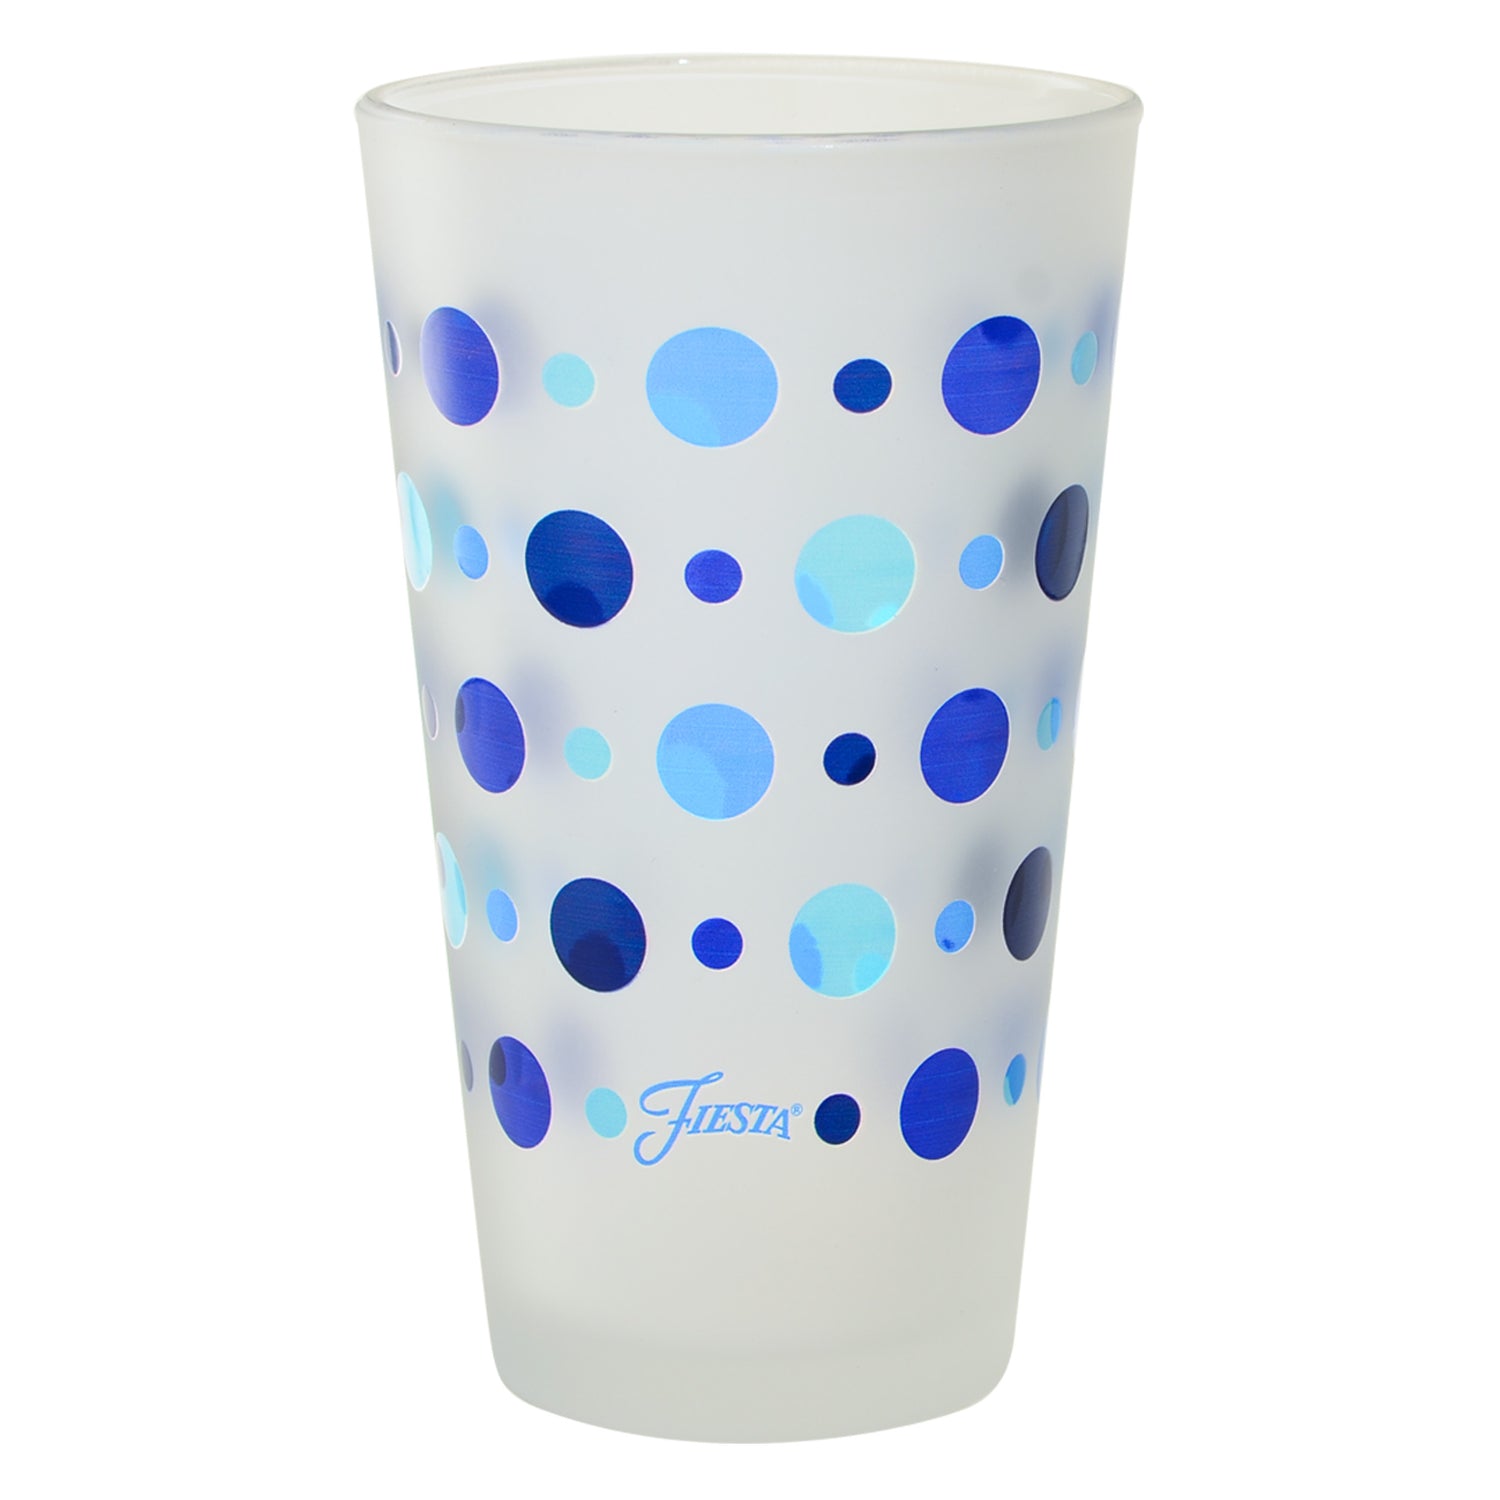 Officially Licensed Fiesta Dots 16-Ounce Frosted Tapered Cooler Glass, Set of 4 (nightfall)